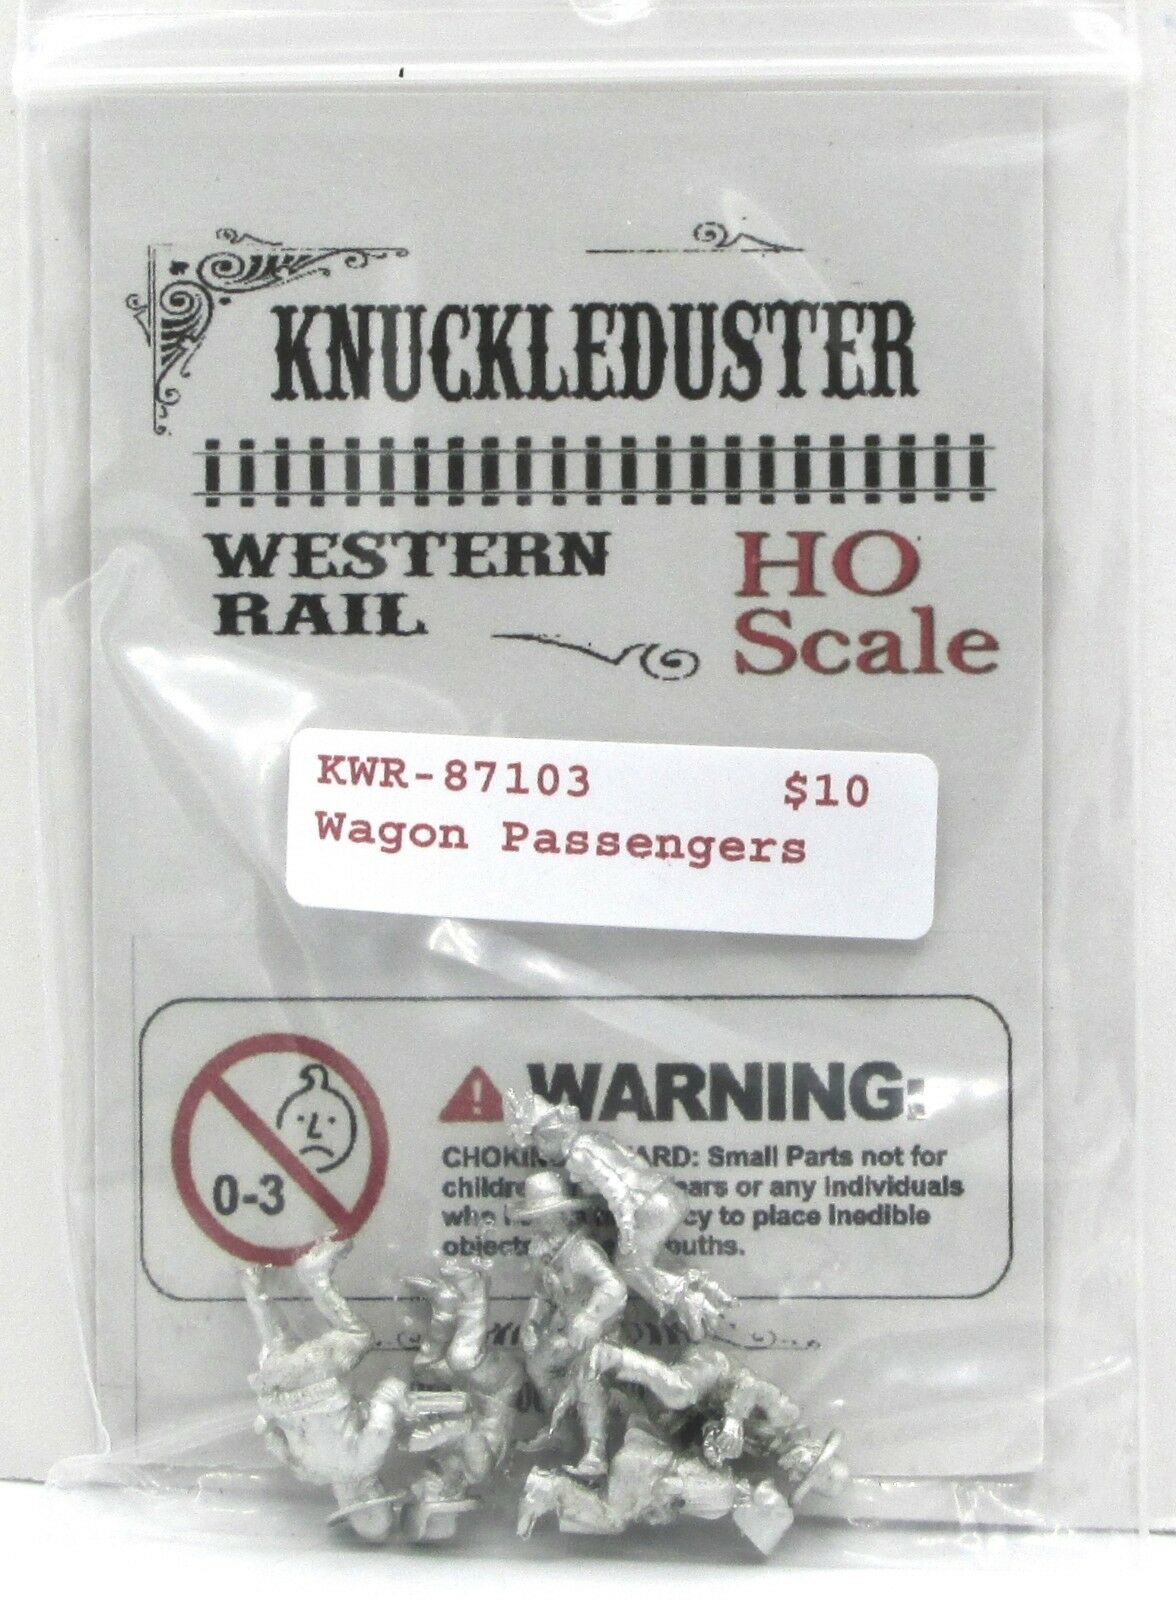 Knuckleduster Kwr-87103 Wagon Passengers (ho Scale) Old West Civilians Riders